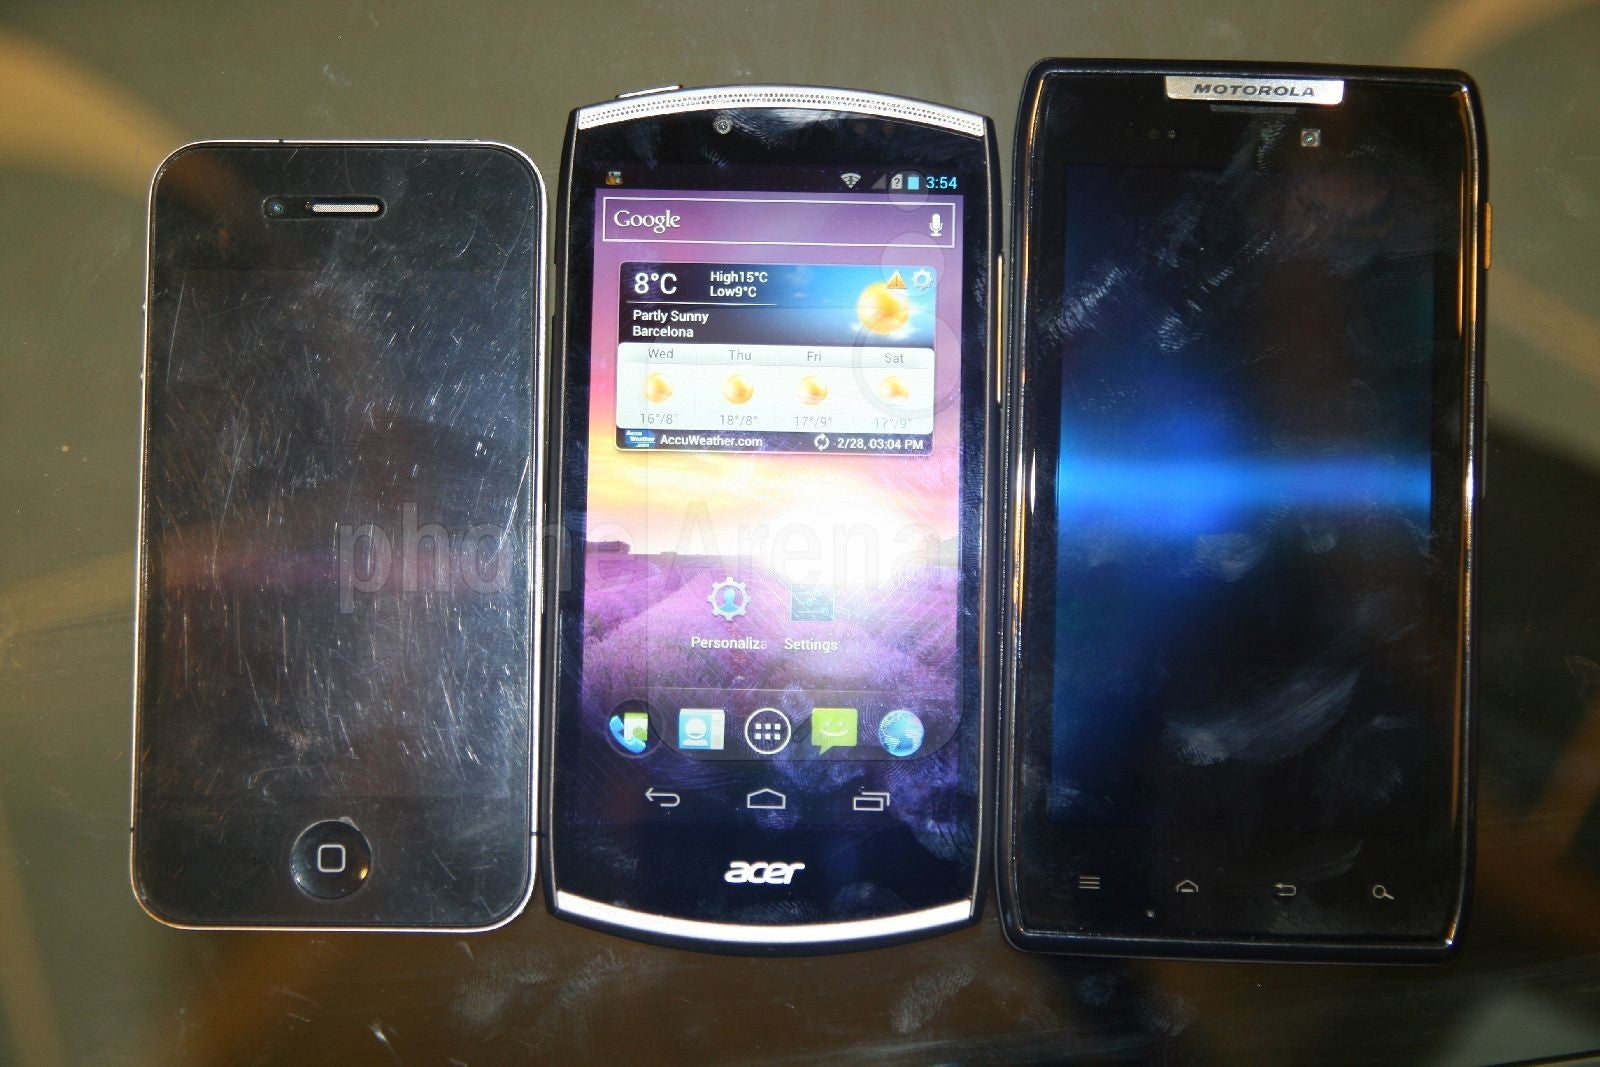 Left to right - Apple iPhone 4, Acer CloudMobile, Motorola DROID RAZR - Acer CloudMobile Hands-on Review